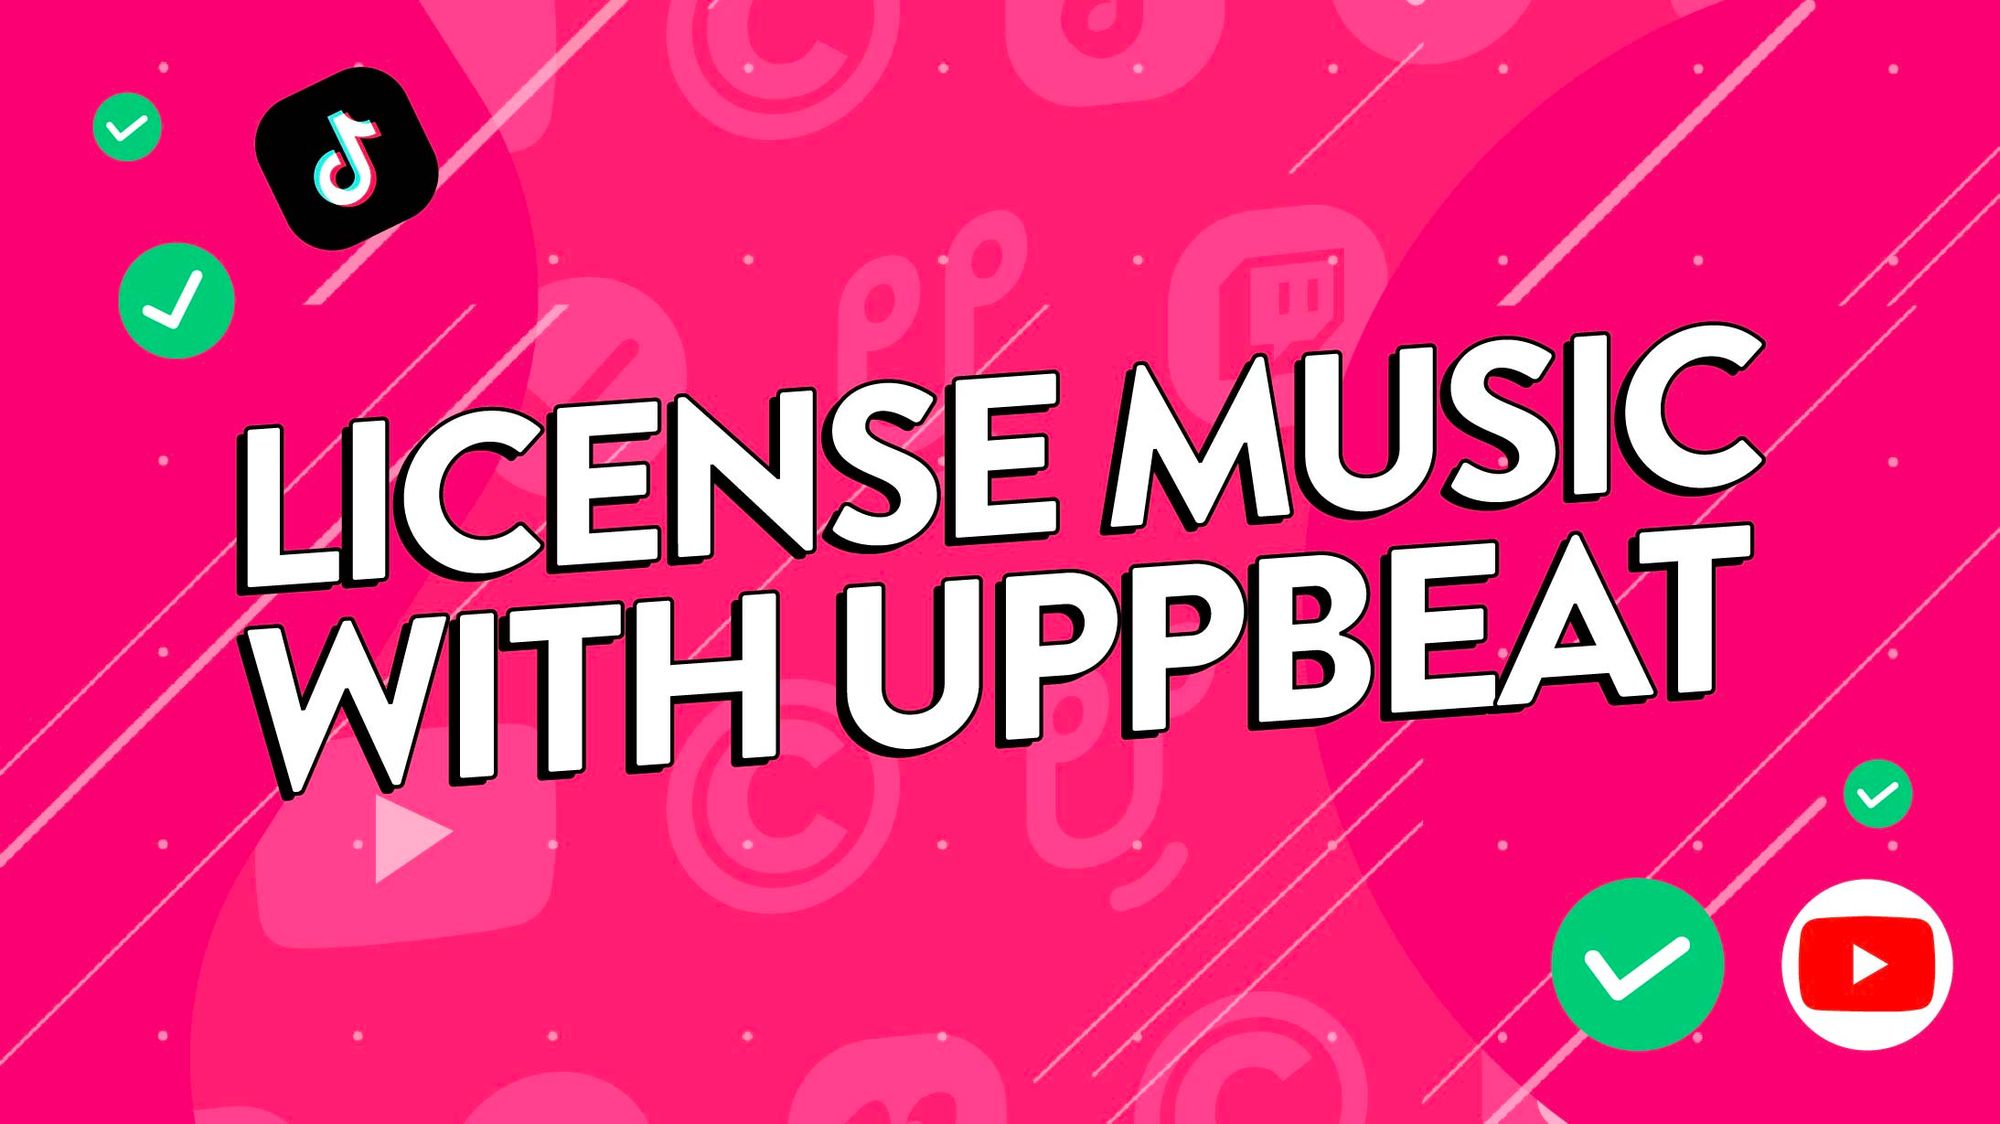 Images of social media platform logos with text that reads 'License music with Uppbeat.'